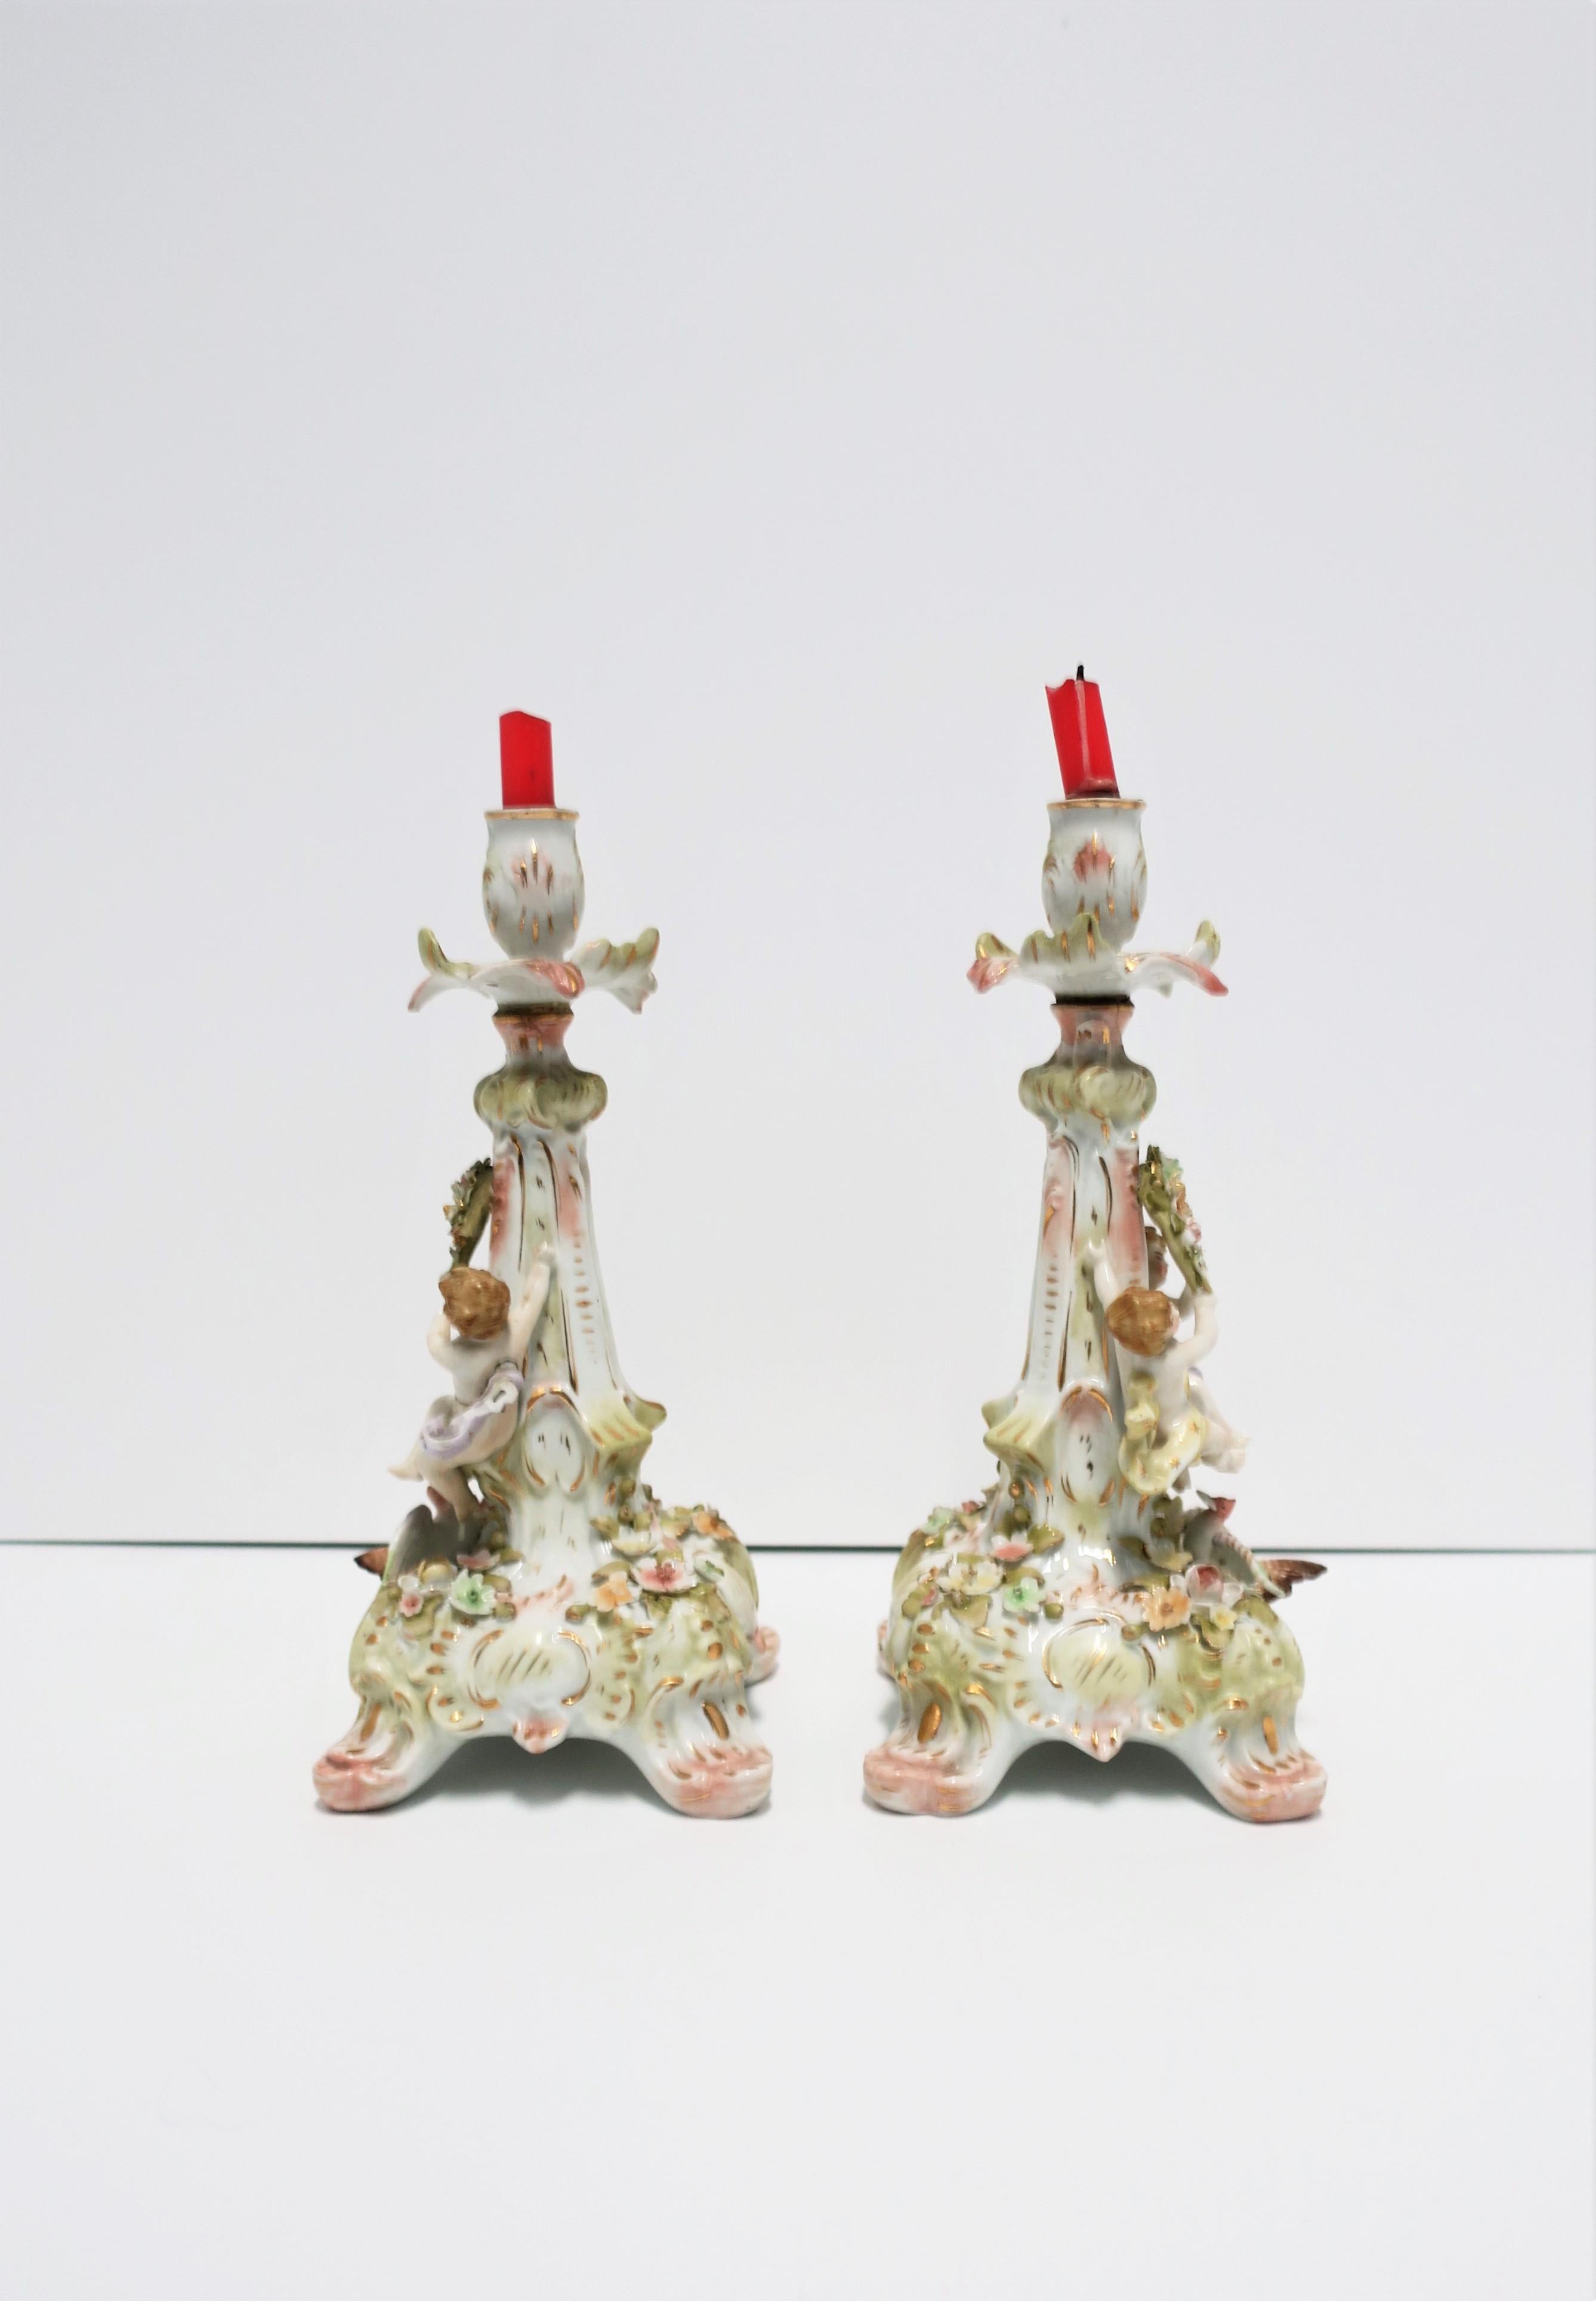 Antique Rococo German Porcelain Candlesticks Holders with Putti, Pair  For Sale 6